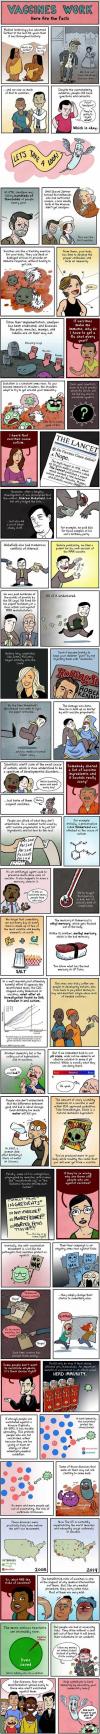 vaccines work, here are the facts, comic, infographic